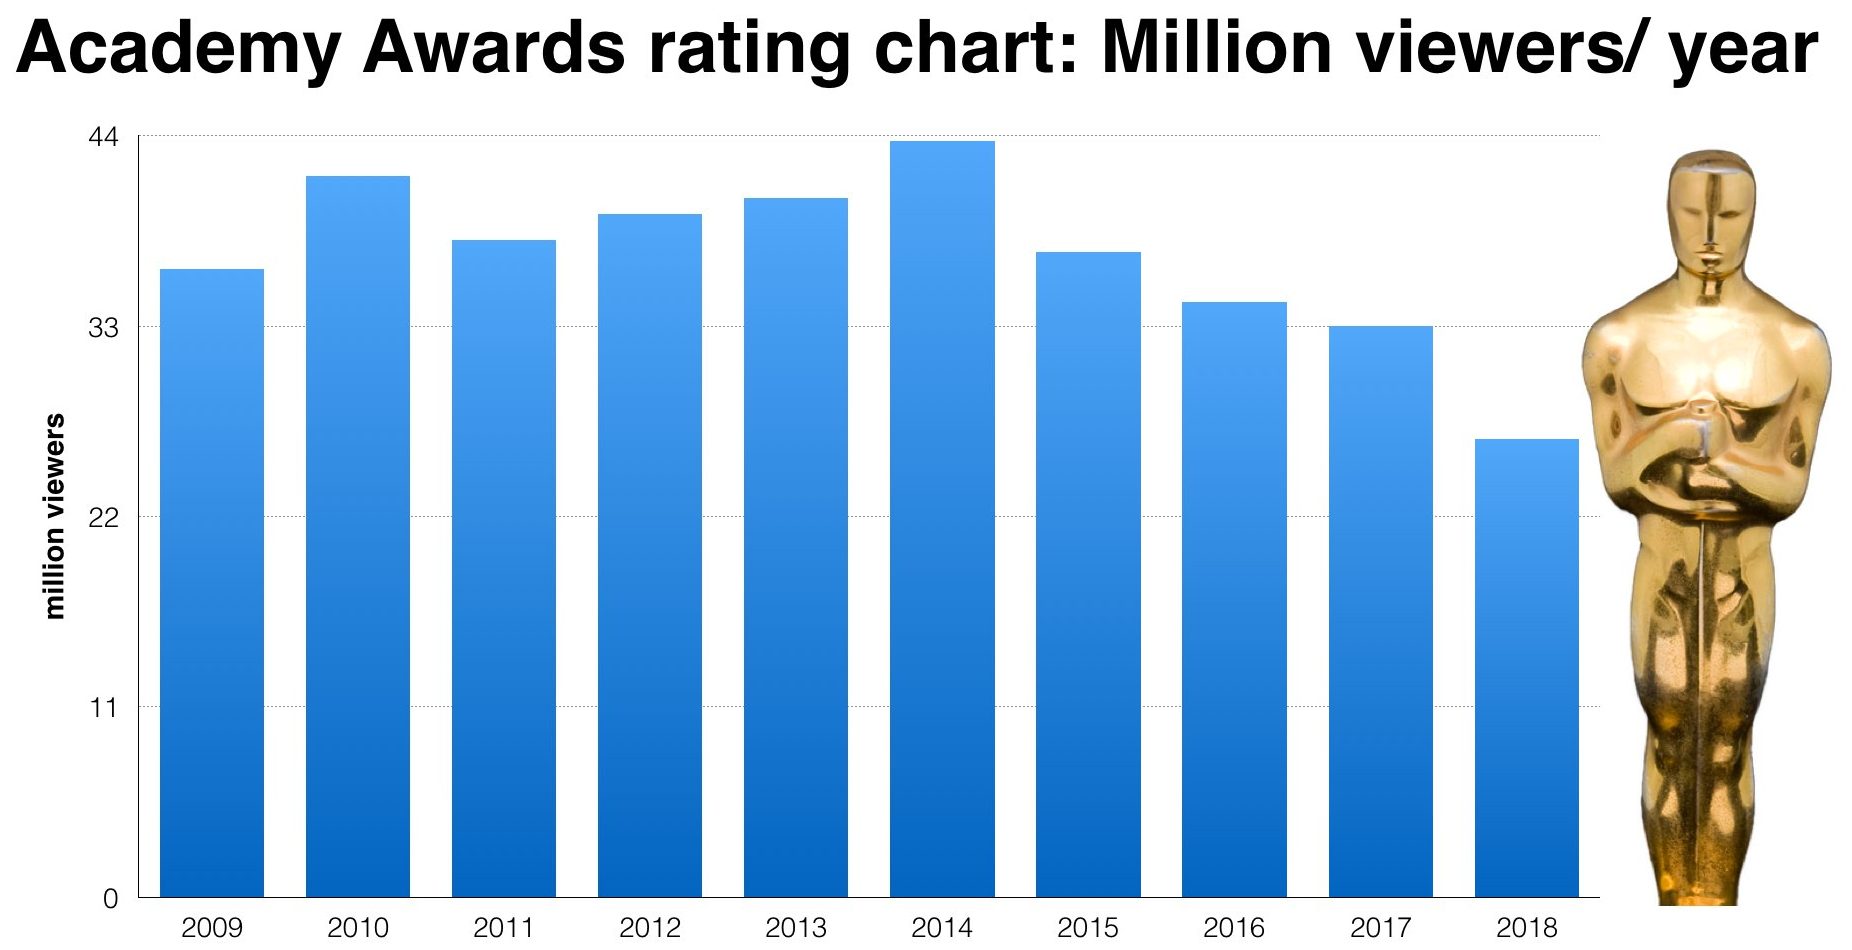 Academy Awards rating chart: Million viewers/ year